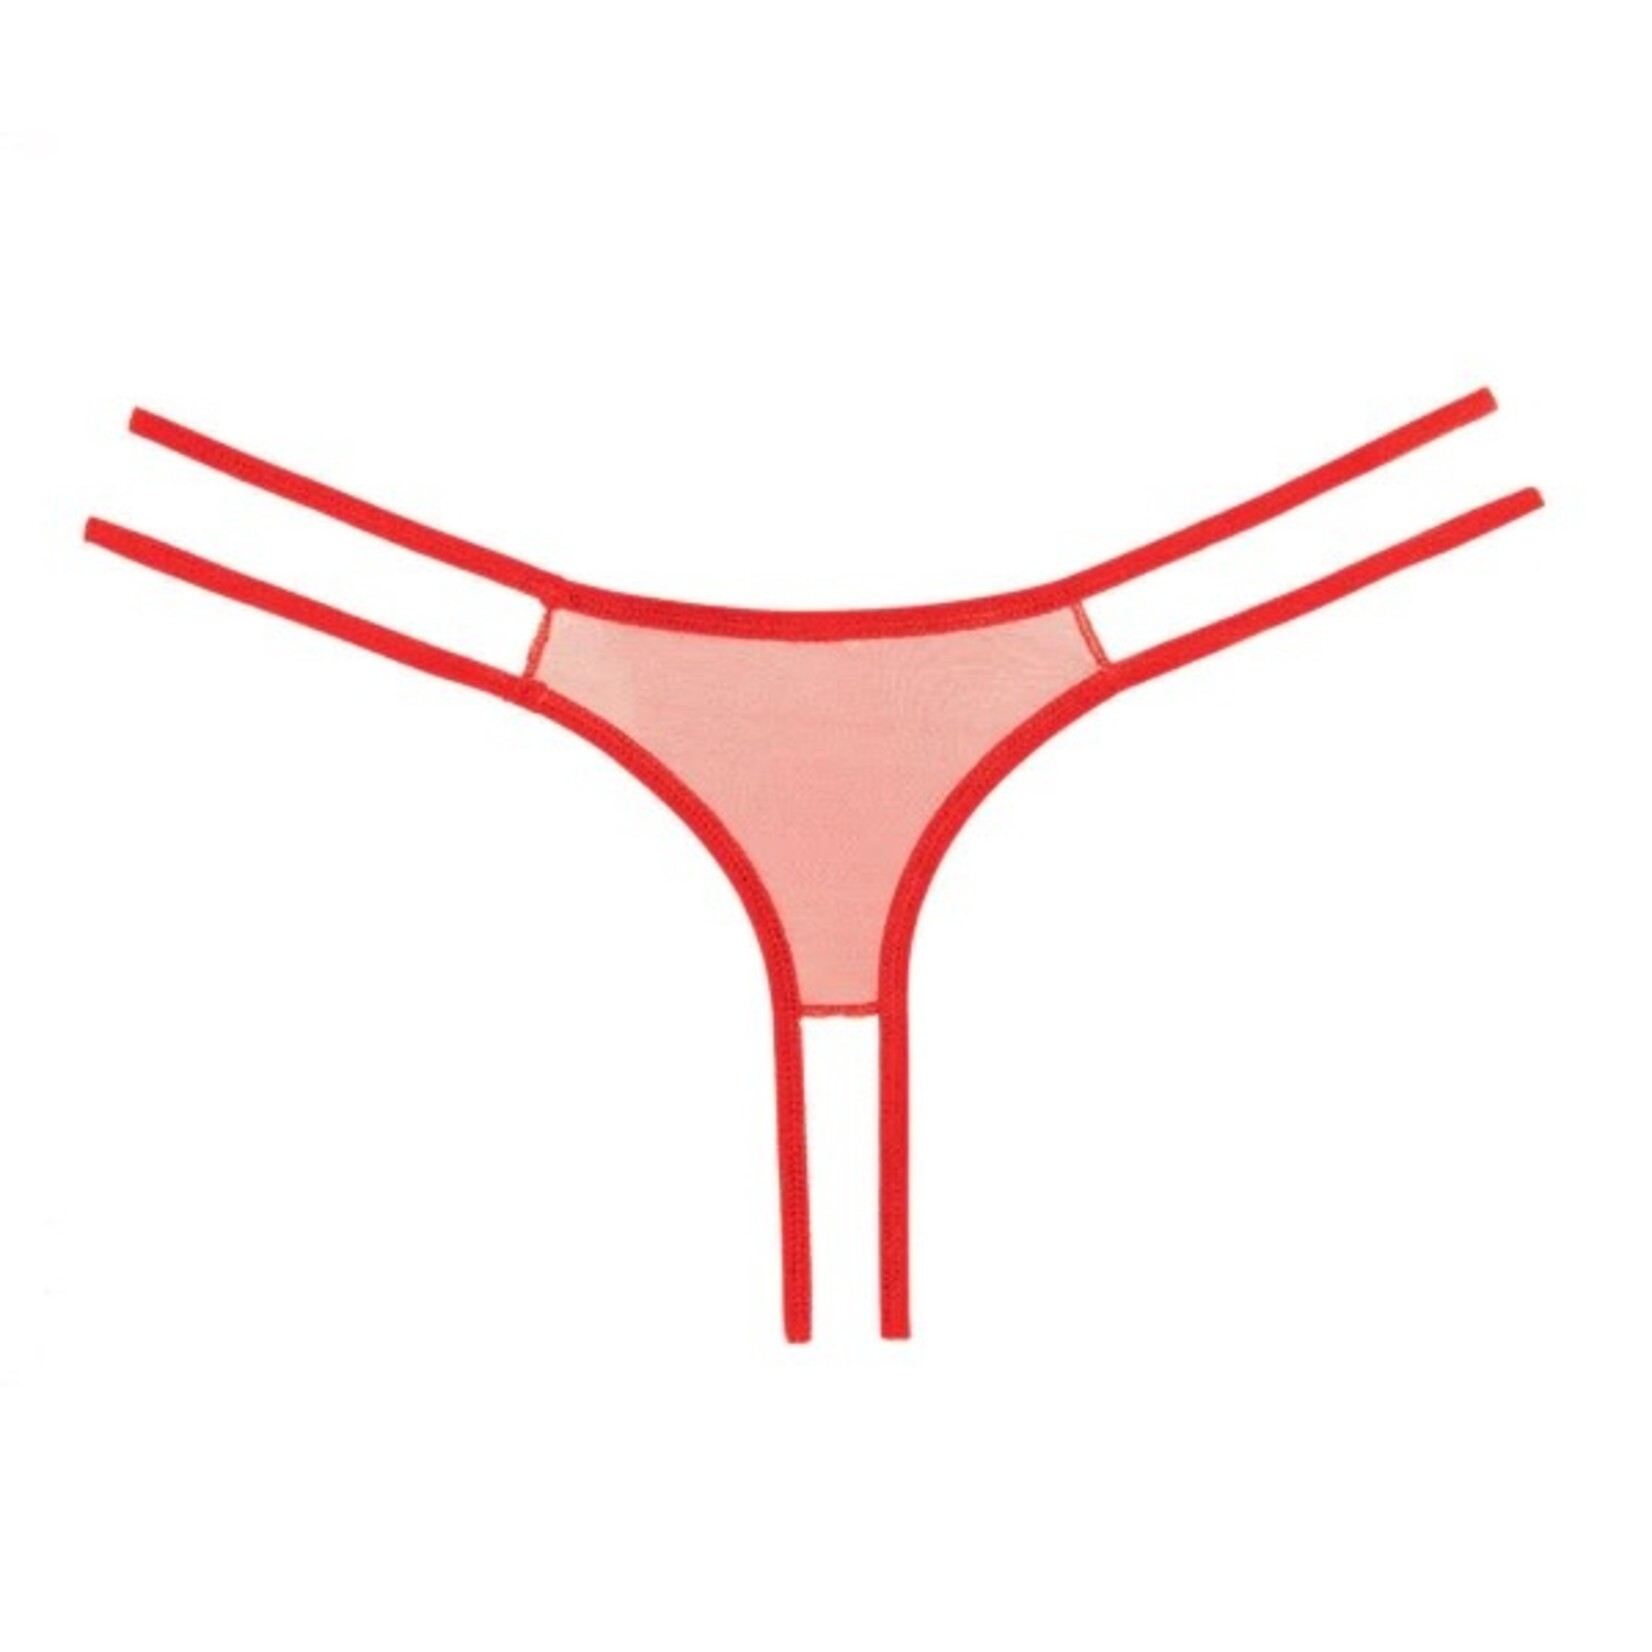 ALLURE LINGERIE ALLURE ADORE - CROTCHLESS SCALLOPED LACE HONEY PANTY - RED